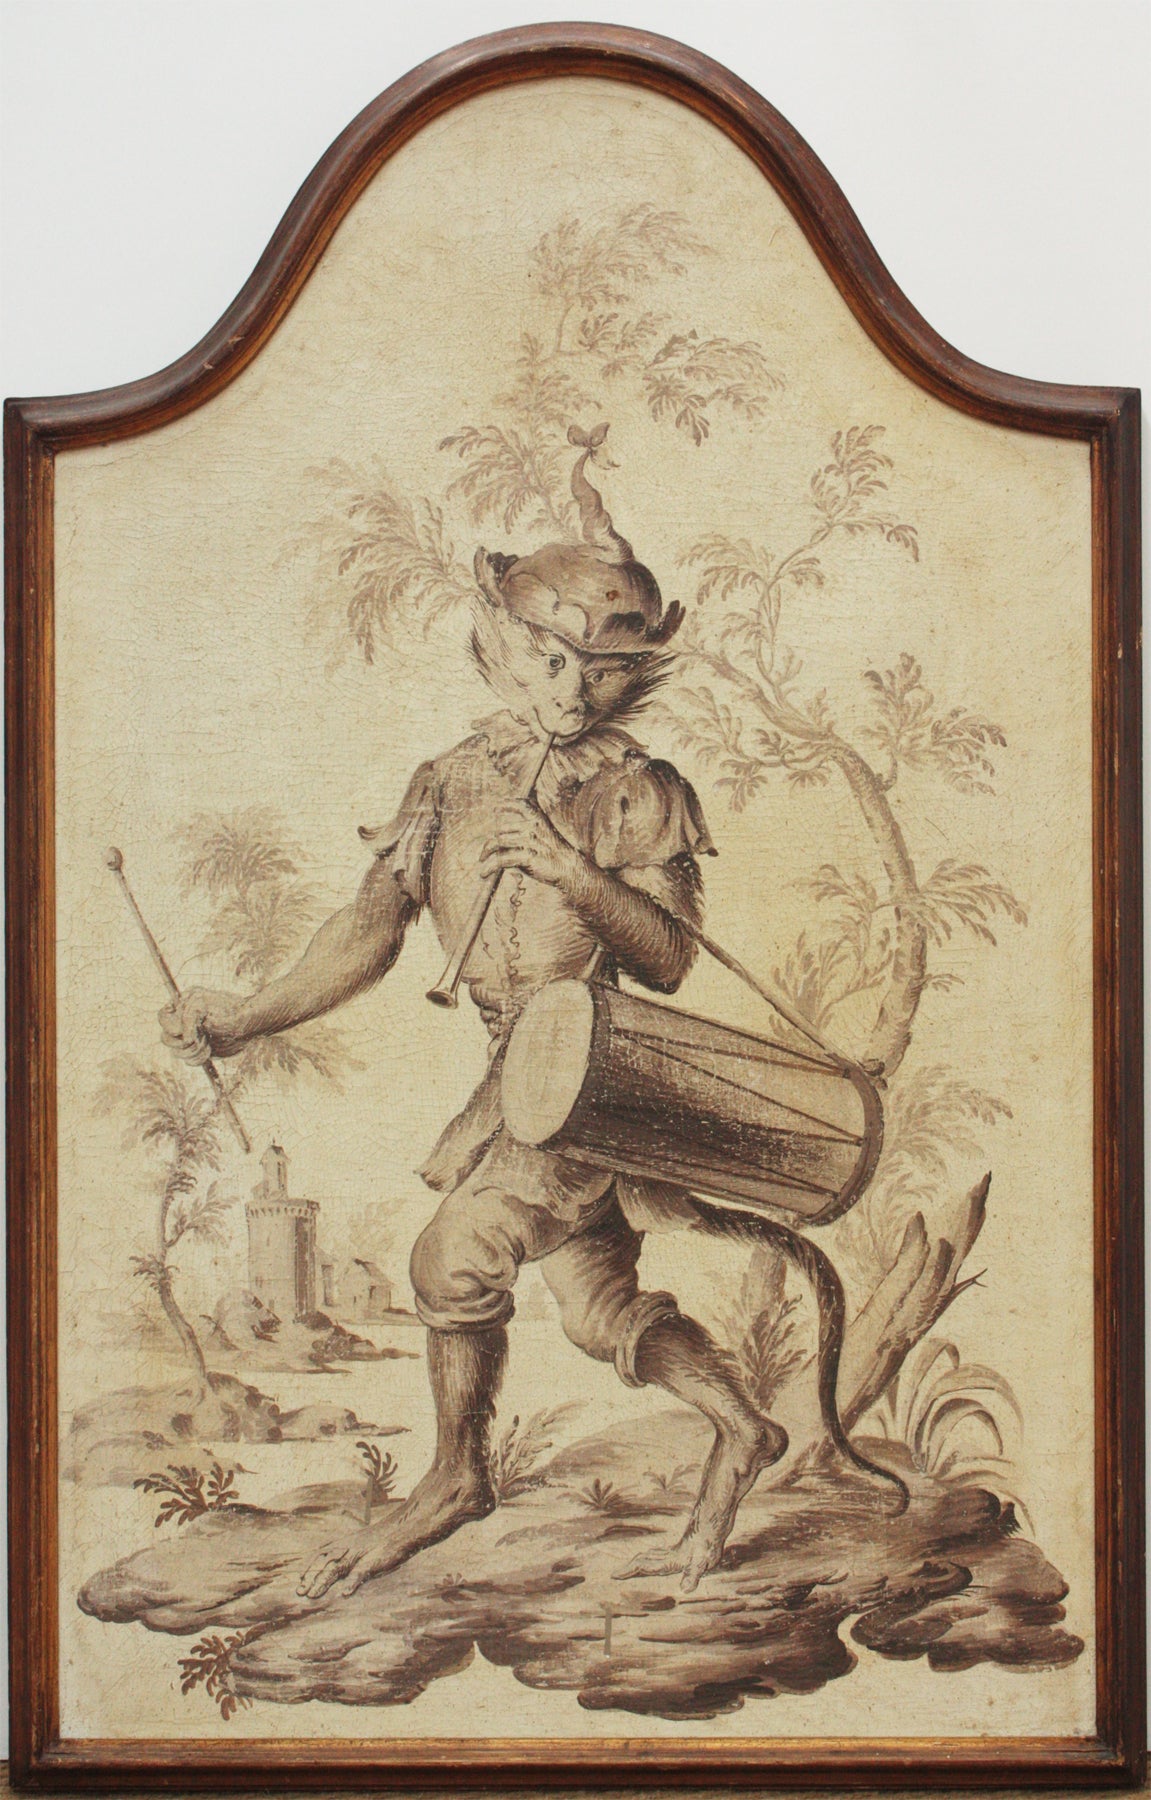 Arm Drum and Fife Player, after Affenkapelle (Monkey Band)